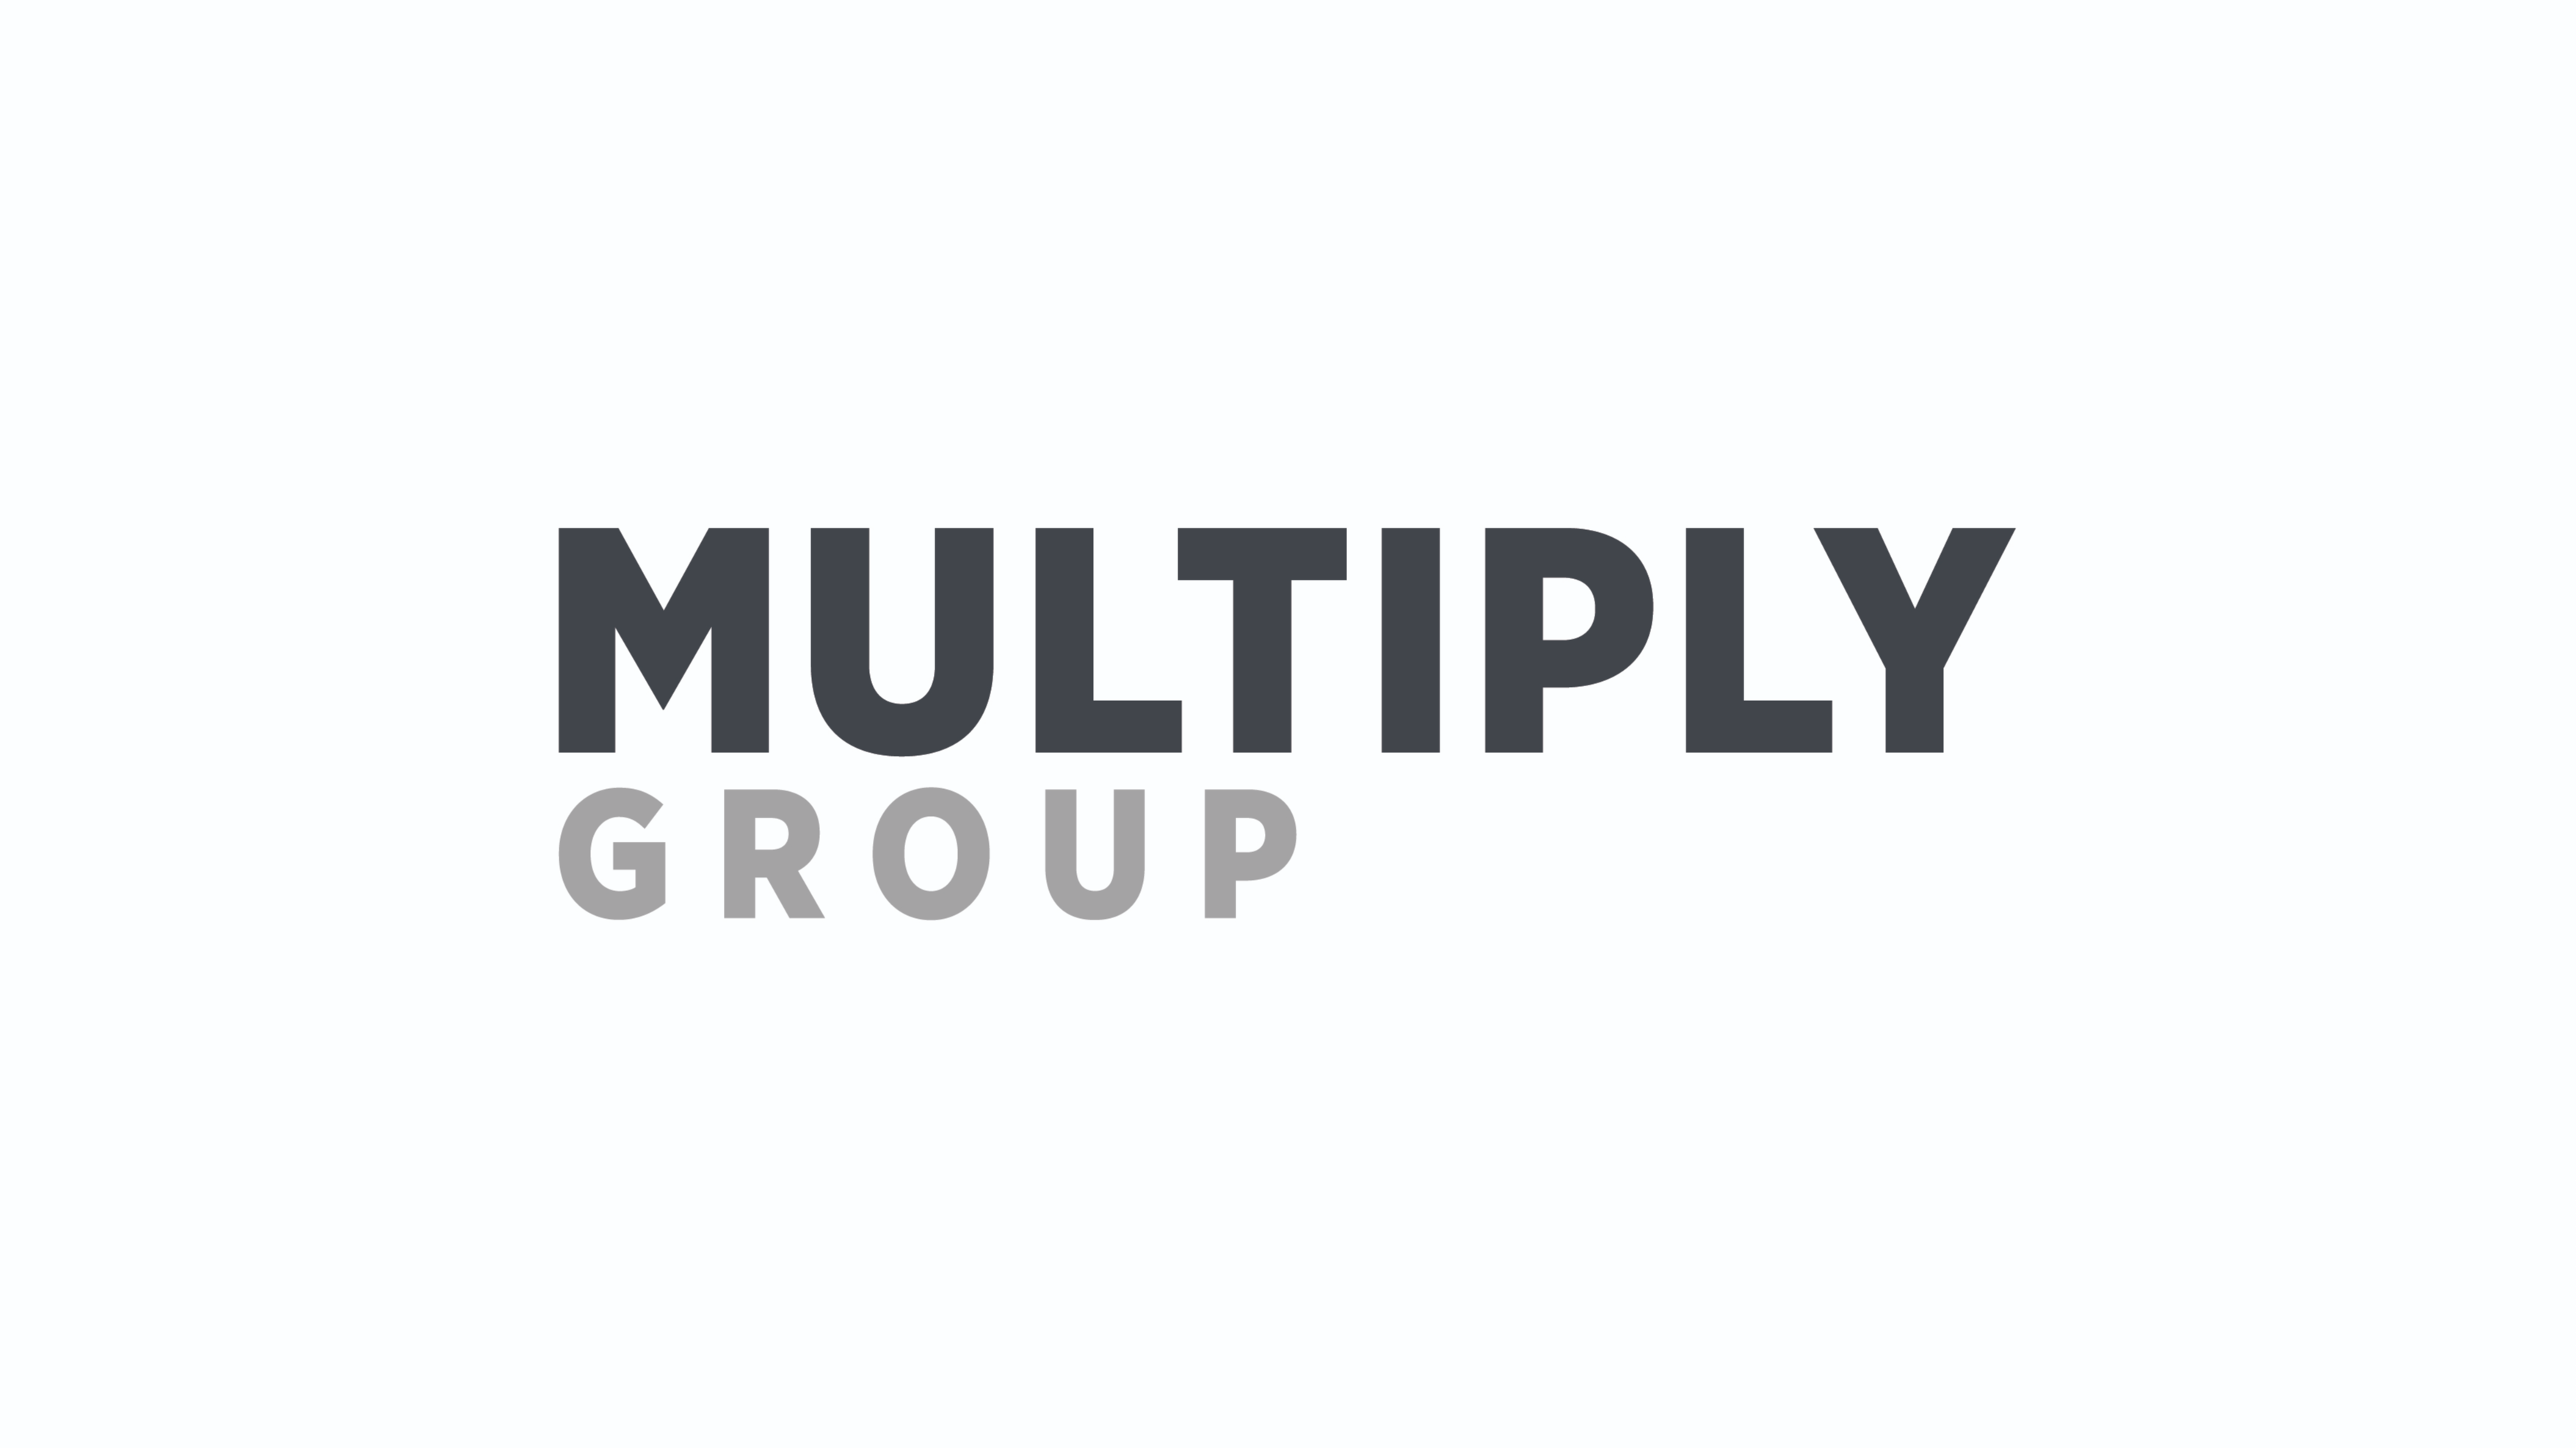 https://adgully.me/post/1952/multiply-group-reports-net-profit-excluding-fair-value-gains